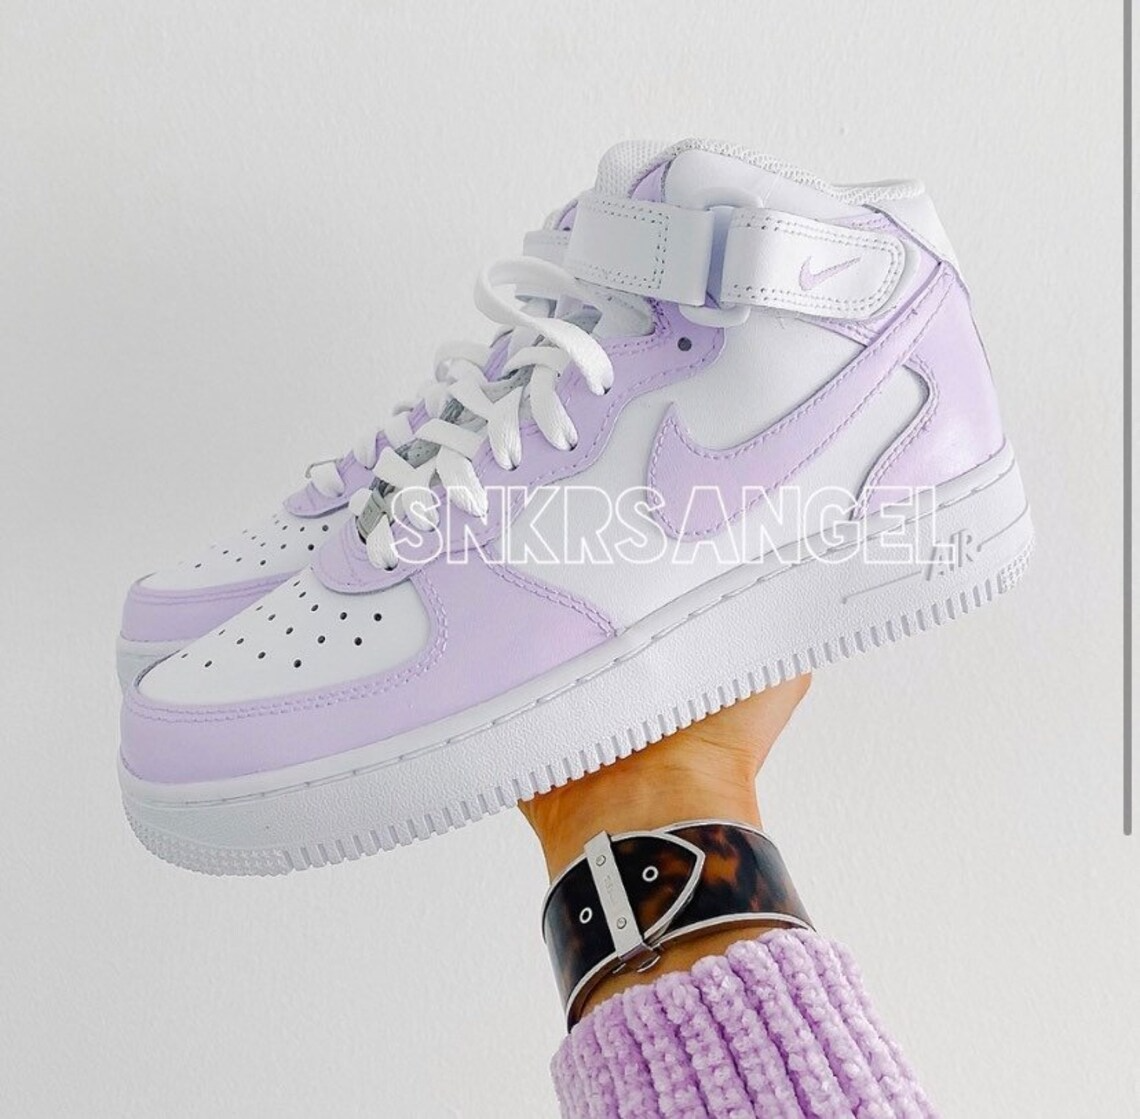 Custom Air Force 1's! How they looking? : r/Nike